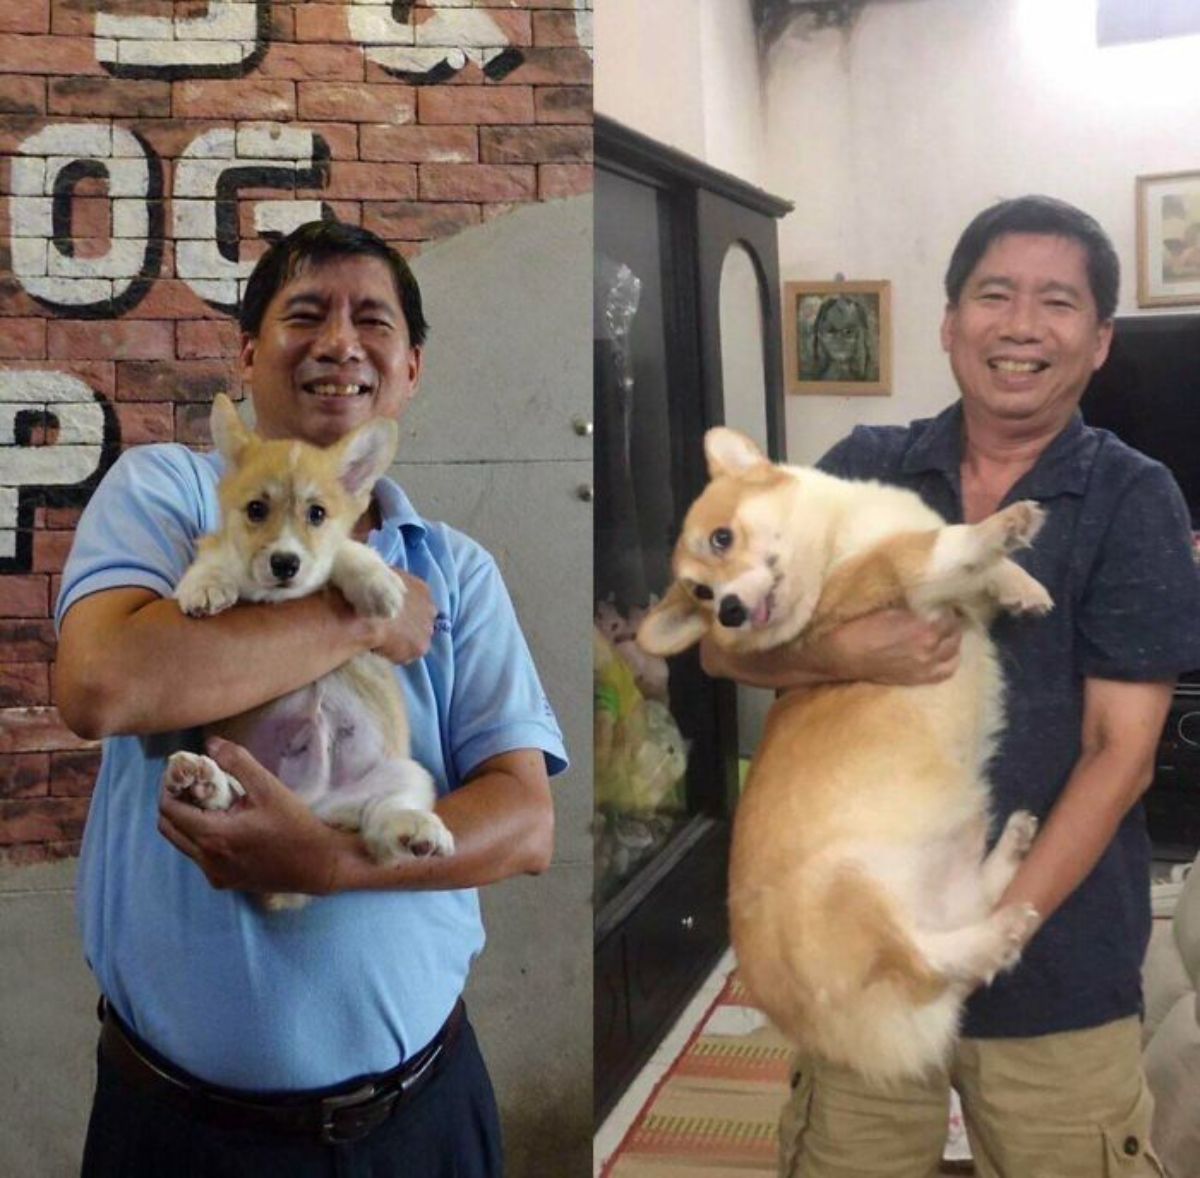 1 photo of brown and white corgi puppy held by a man and 1 phoot of the same man holding the grown up dog